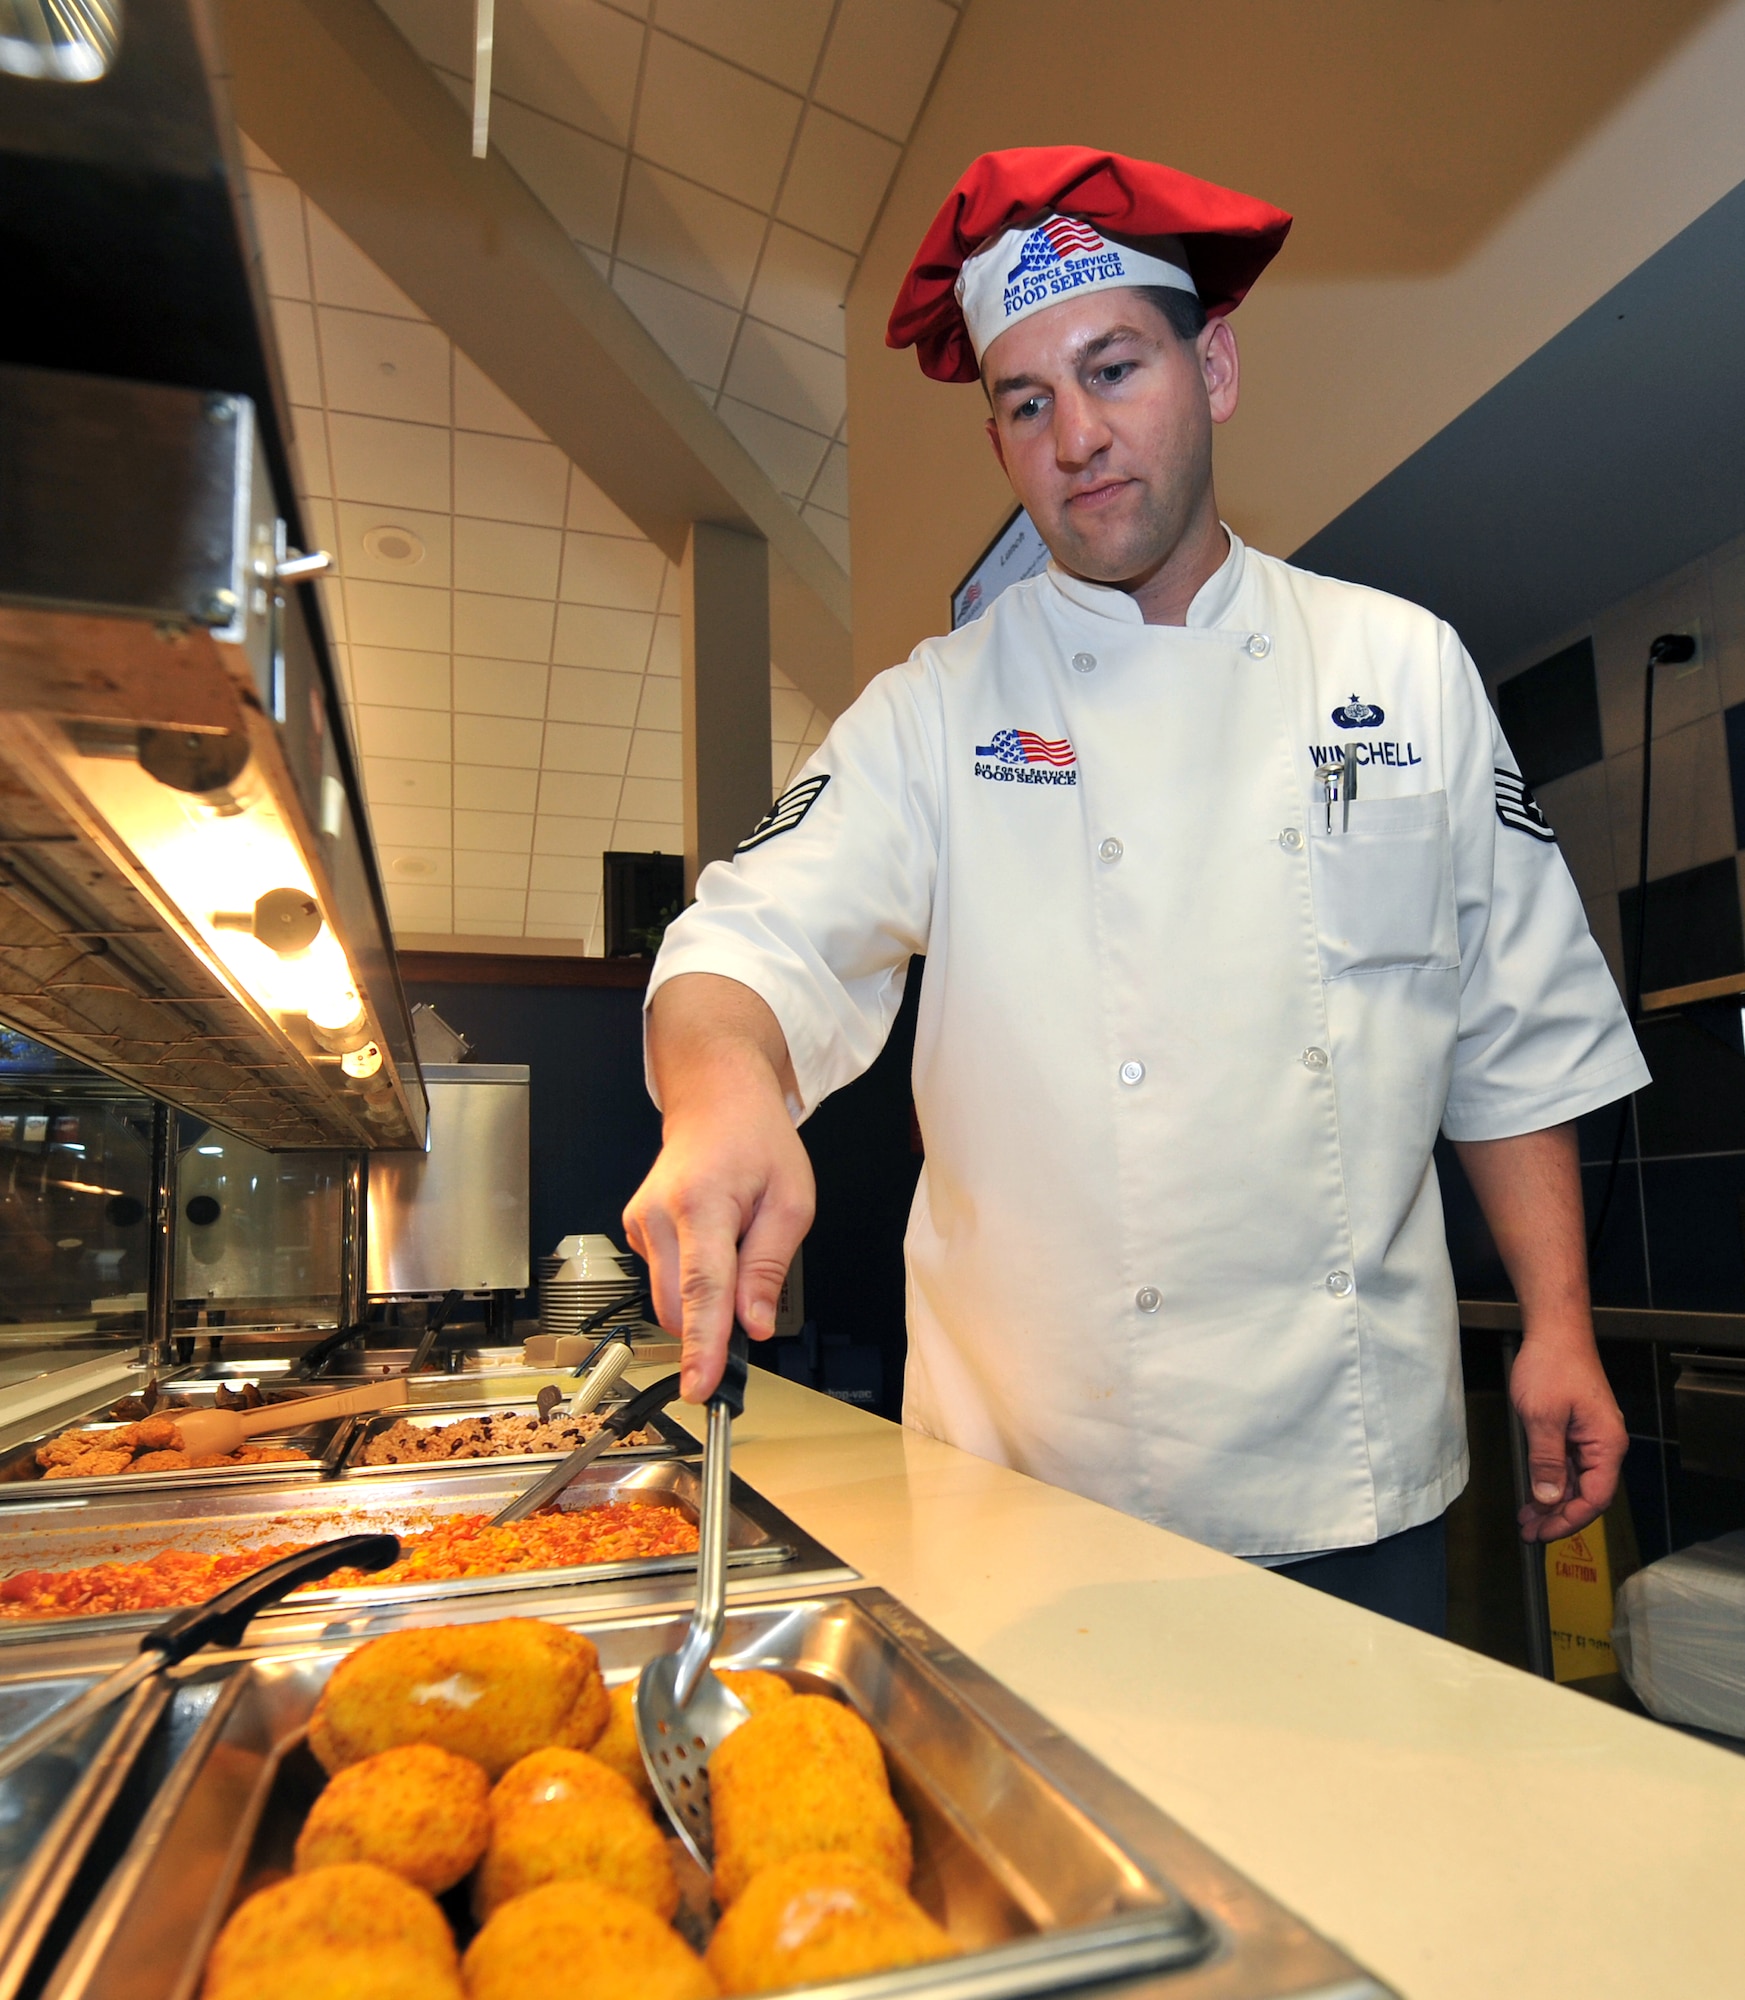 Tech. Sgt. David Winchell, a 19th Force Support Squadron dining facility shift leader, serves chicken cordon bleu Aug. 26, 2011, to Airmen at Little Rock Air Force Base, Ark. FTI continues to provide revamped menus, dining facility renovations and increased operating hours to FTI pilot installations. (U.S. Air Force photo/Staff Sgt. Chris Willis) 